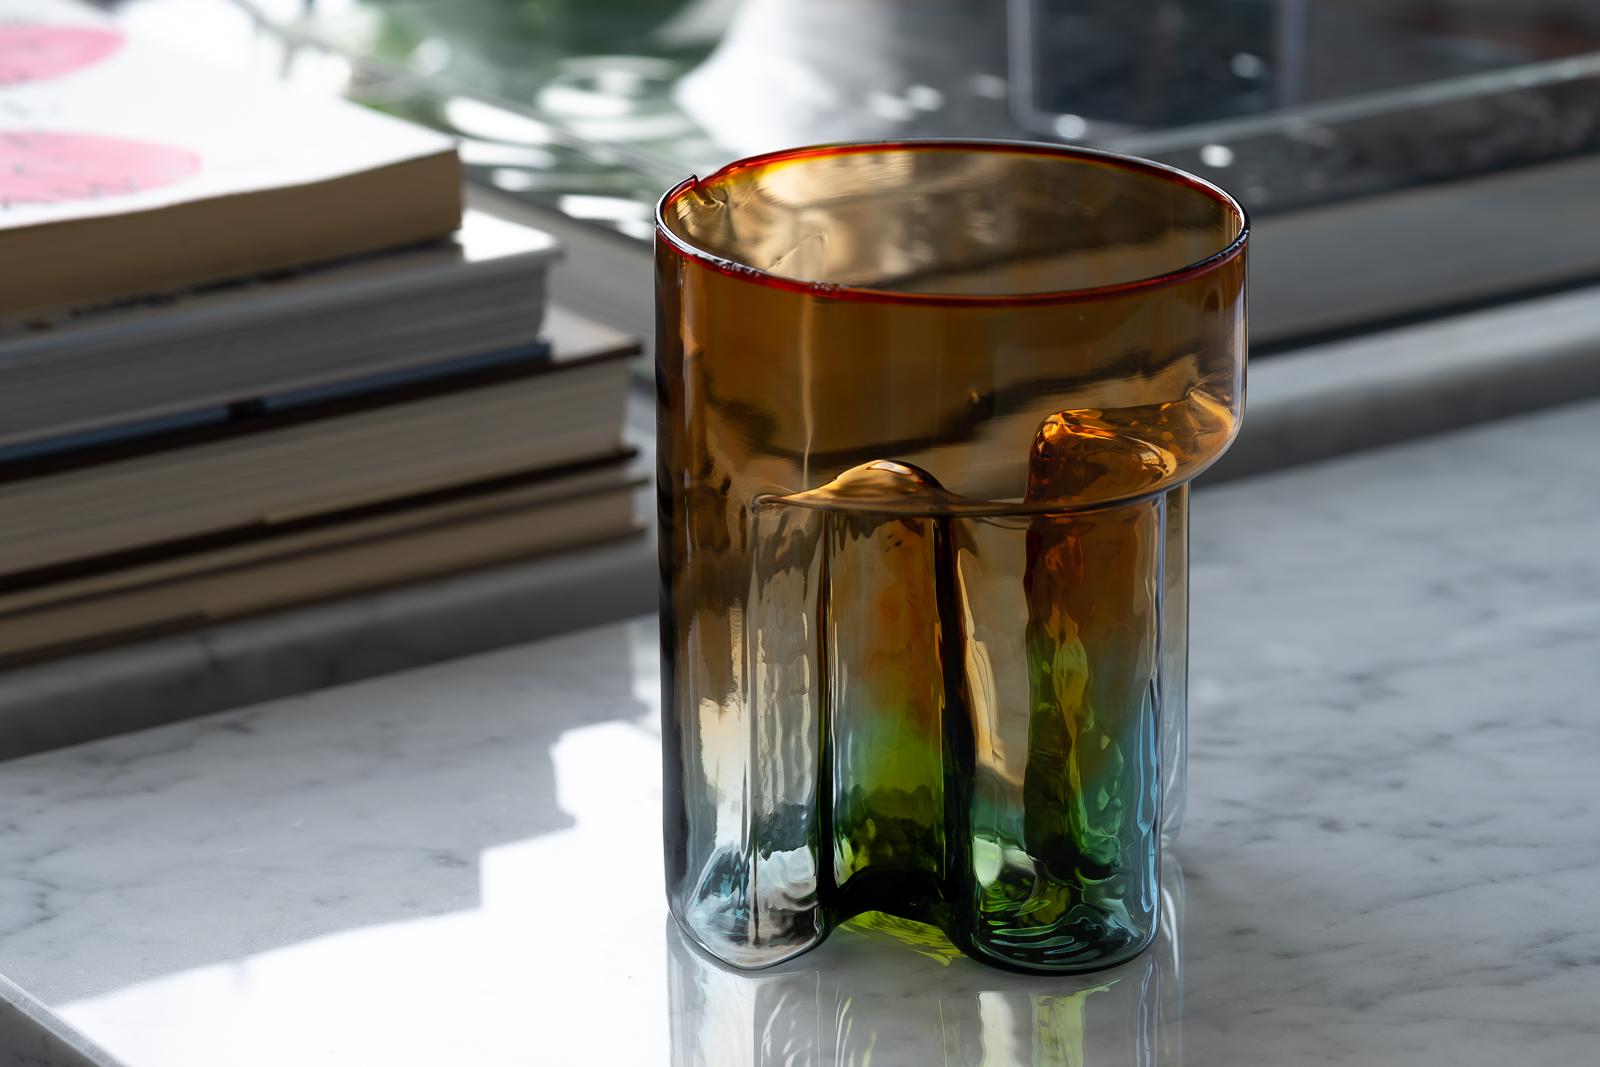 A rare and stunning multicolored carafe designed by Sergio Asti for Murano glassworks VeArt in 1975. The intensely-colored 